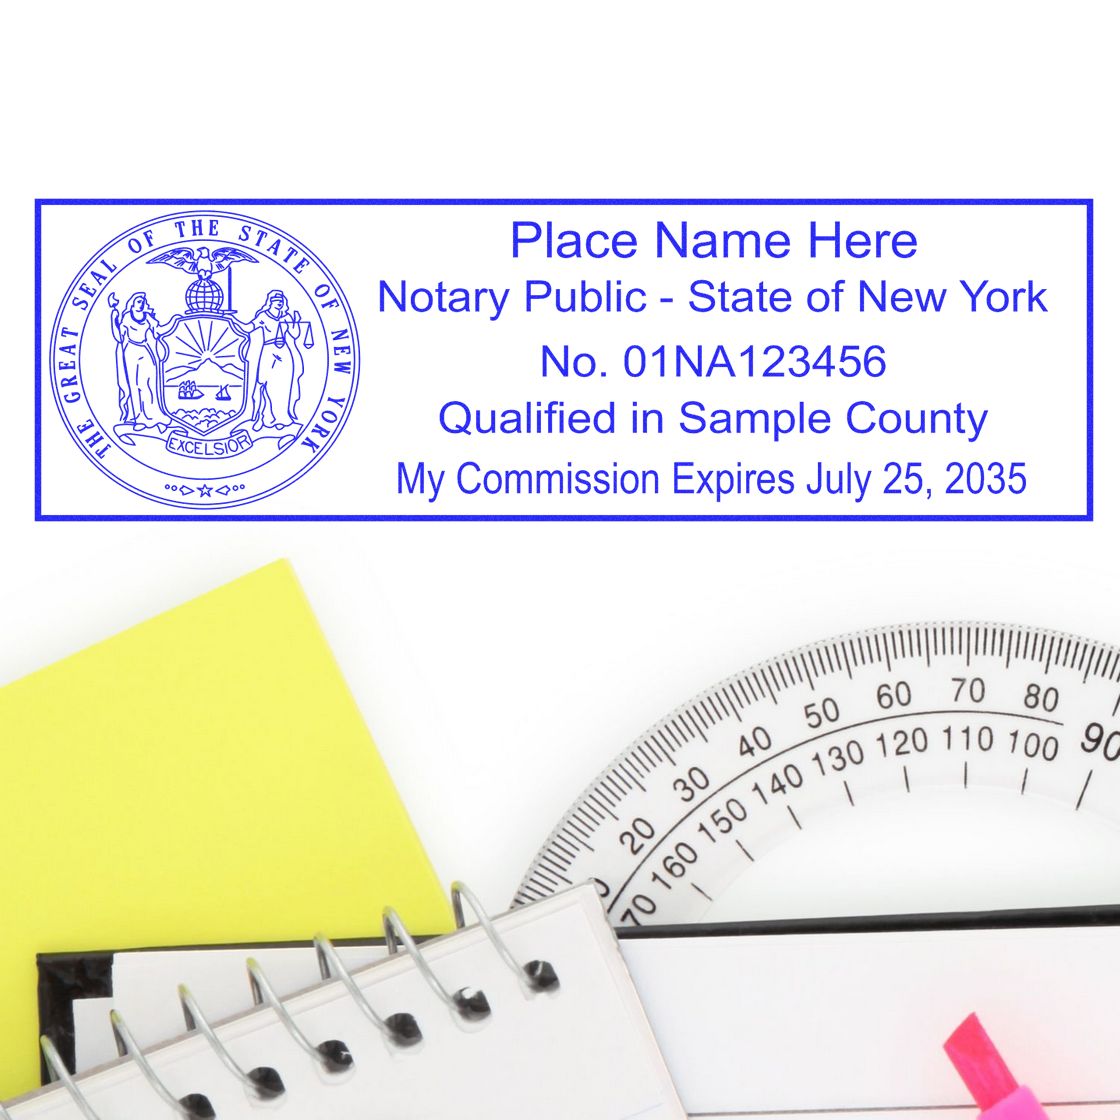 The MaxLight Premium Pre-Inked New York State Seal Notarial Stamp stamp impression comes to life with a crisp, detailed photo on paper - showcasing true professional quality.